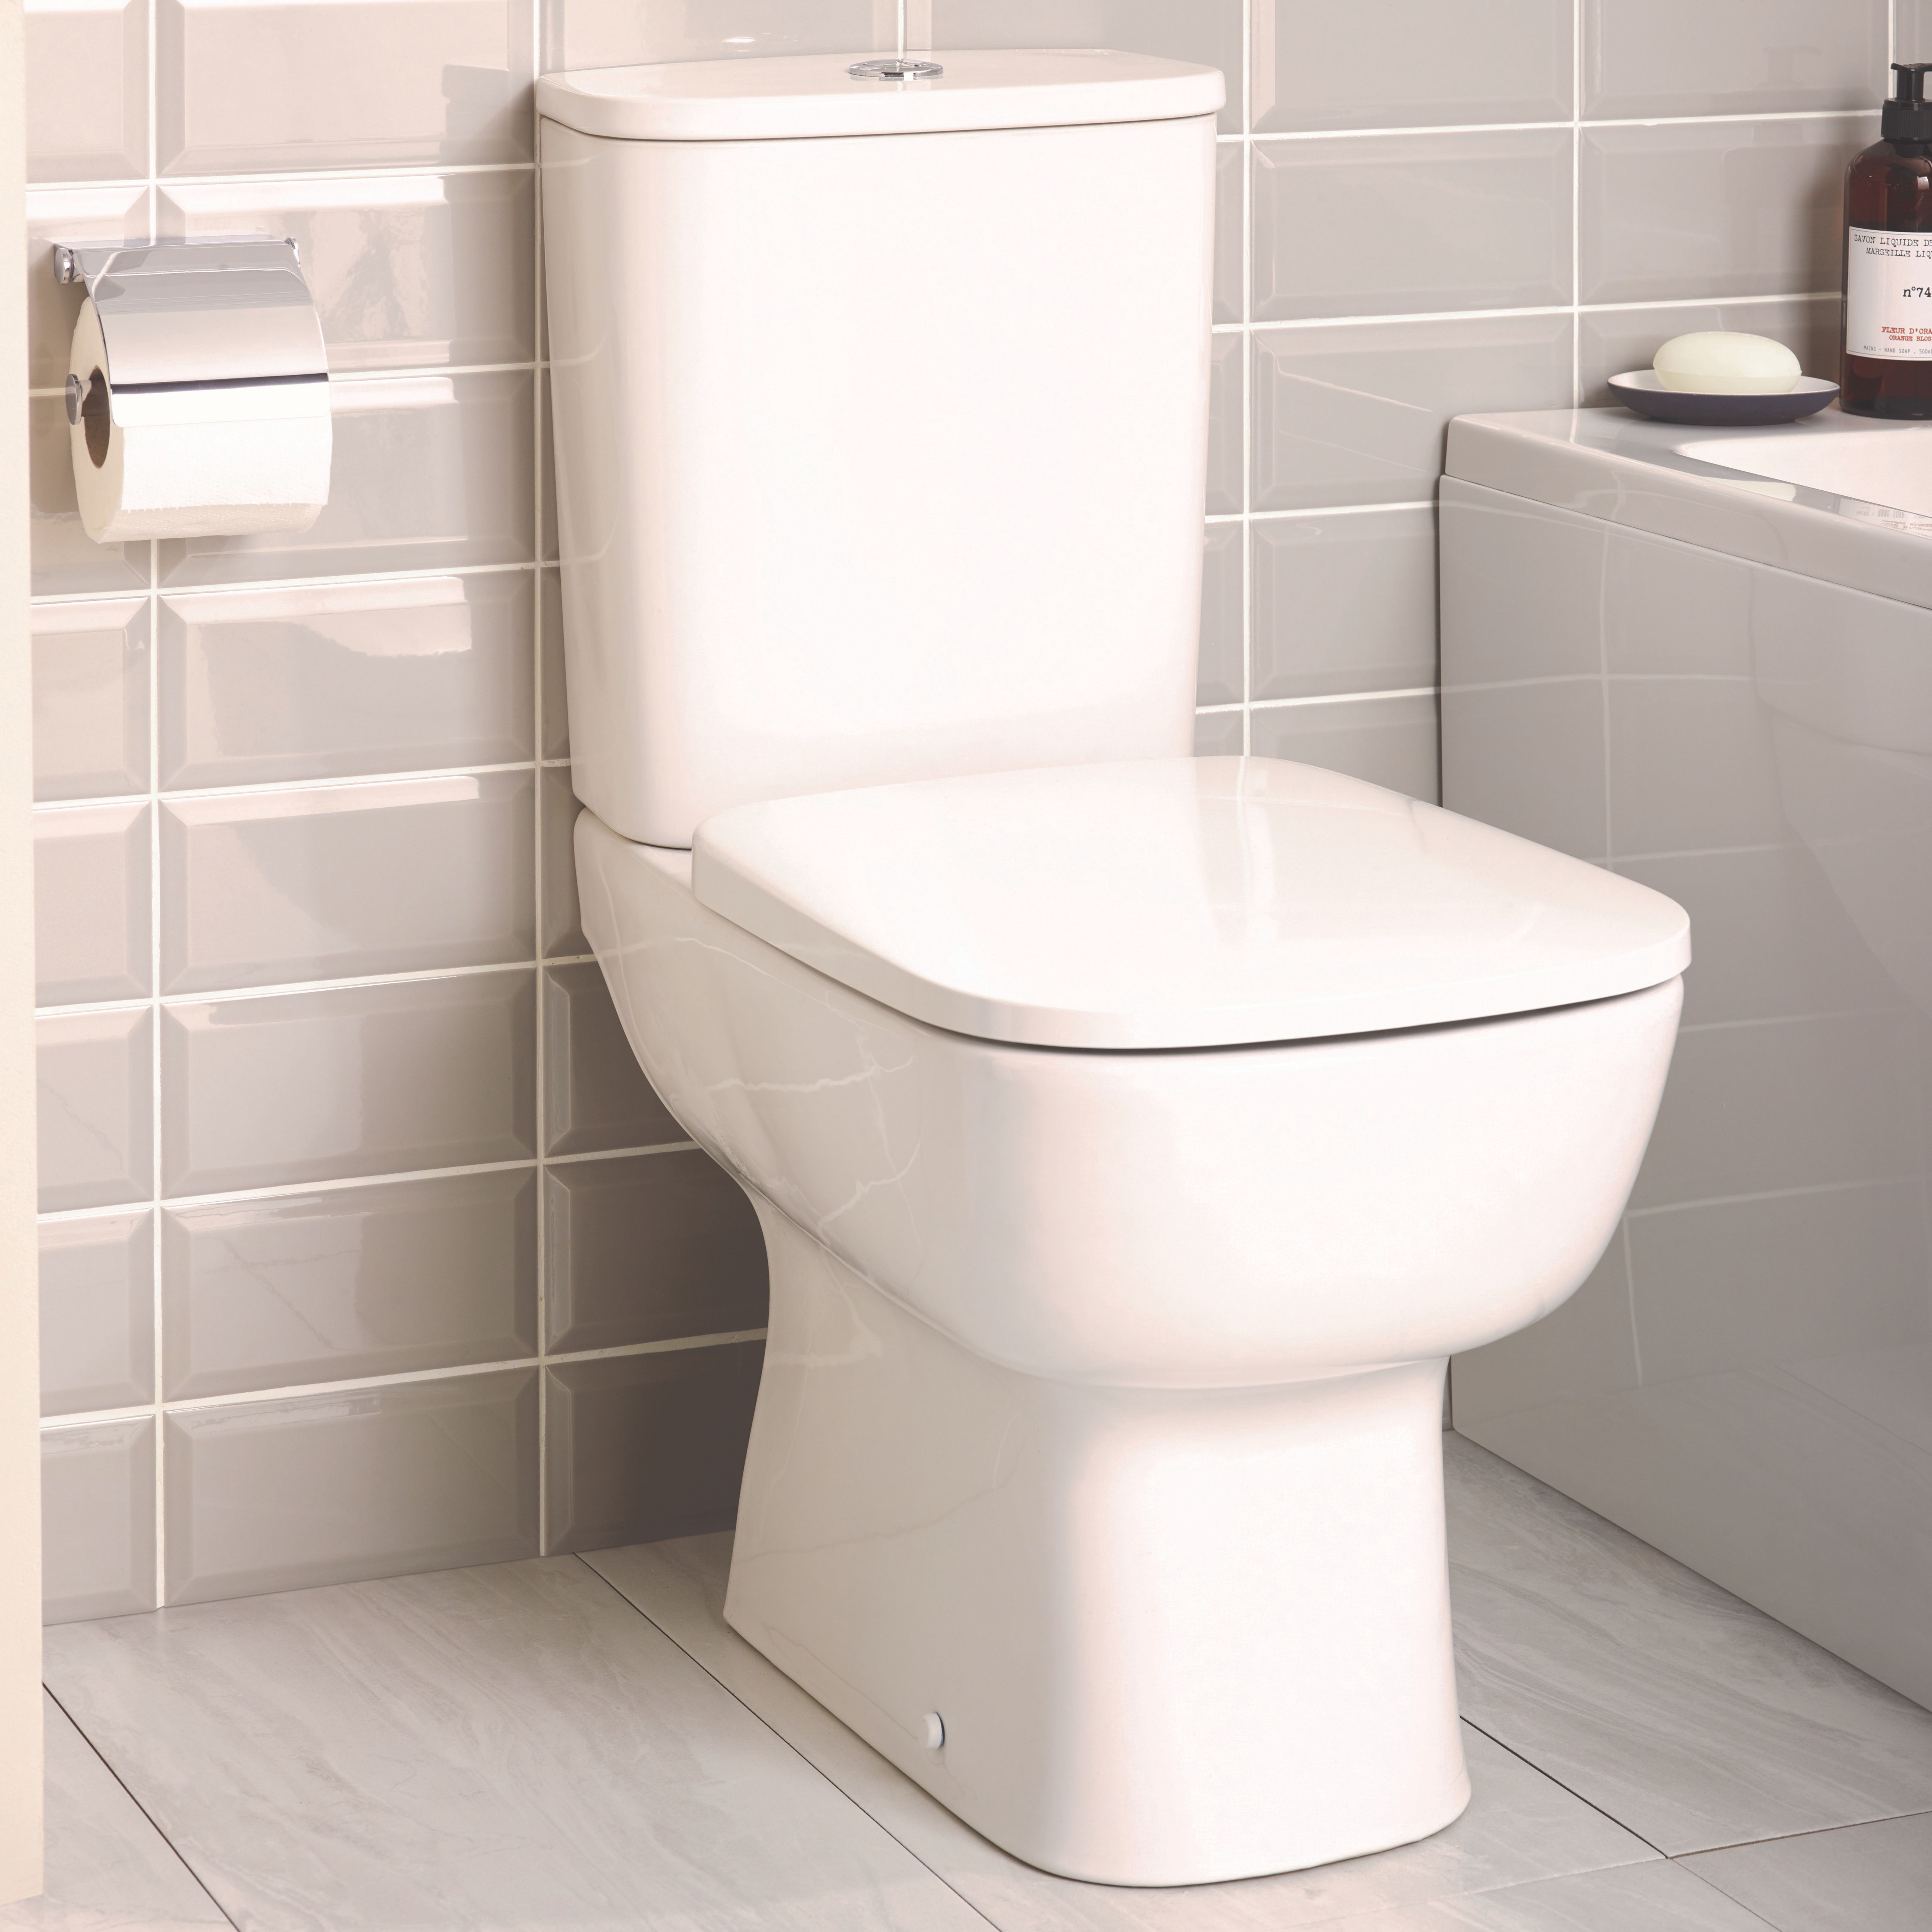 Ideal Standard Studio echo White Standard Close-coupled Toilet set with Soft close seat